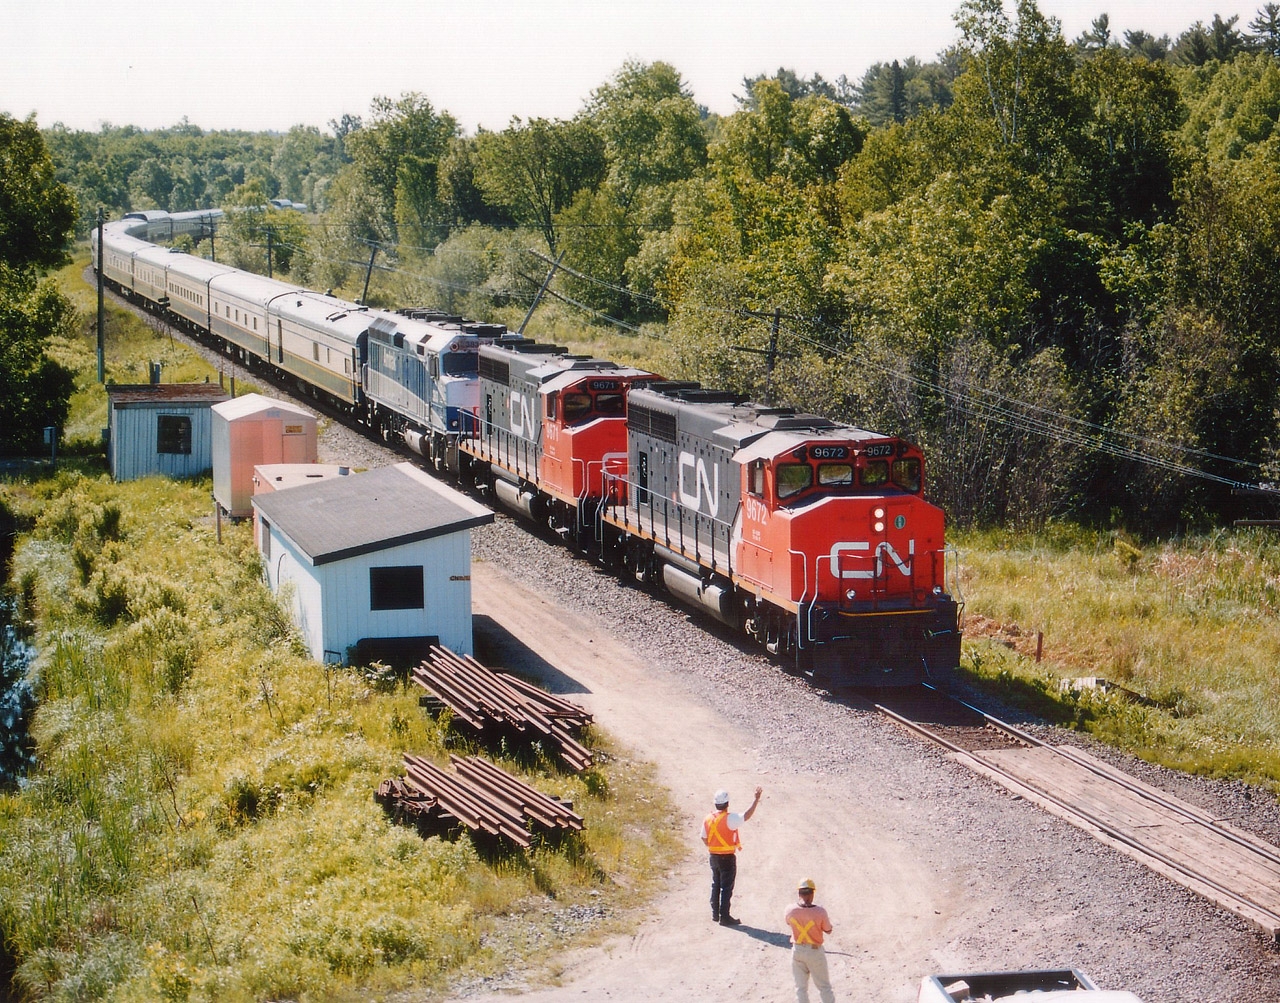 While out shooting CP in and around Parry Sound I noticed a light up on the CN for a northbound. Went over to Isabella St to wait around as I had no idea where this train might be. An old town "regular" can came up and started some chit-chat with me. The scanner crackled and I missed the transmission. A minute later, around the bend, past the station came CN and I just stepped back to watch. OMG!!! It is the American Orient Express!!!! Only the second time I had ever seen it, and again, right out of the morning sun. So I told the old guy I had to run. Hopped in the car and out onto Hwy 69 at a good clip. This train was really moving. I did not know where I would catch him so drove north until I saw the highway overpass up near Key River, some 80 KM up the road. Rather than getting mixed up in Sudbury, I elected to try for a shot here. Yelled over to a CN guy, and he told me the train "wasn't far off". I really had nowhere to wait but down by the car, as the bridge is not all that spacious (no sidewalk) and the truck traffic heavy. Figured I would hear something. I did, but almost too late. Ran like crazy, and just got to where I wanted to be with, seriously, not a second to spare. Looked down, saw the CN guy put his arm up to wave, and snapped the shot. I could have waited another maybe one second but....this was a lot better than missing it. Again, right out of the sun, but ten times better than at Parry Sound. Grabbed a couple of "going shots" off the other side of the bridge and then headed to Sudbury. But he beat me by a long shot, I was stuck in traffic. This was the last time I ever got to see the AOE. It was in business as luxury rail travel, beginning in 1989, but never really took off and became part of "Grandlux Express" and went bankrupt. August 28, 2008 it was all over. Equipment sold or scrapped.
The contract for power was with Amtrak, which is why you see AMTK 393 behind host CN 9672 and 9671.